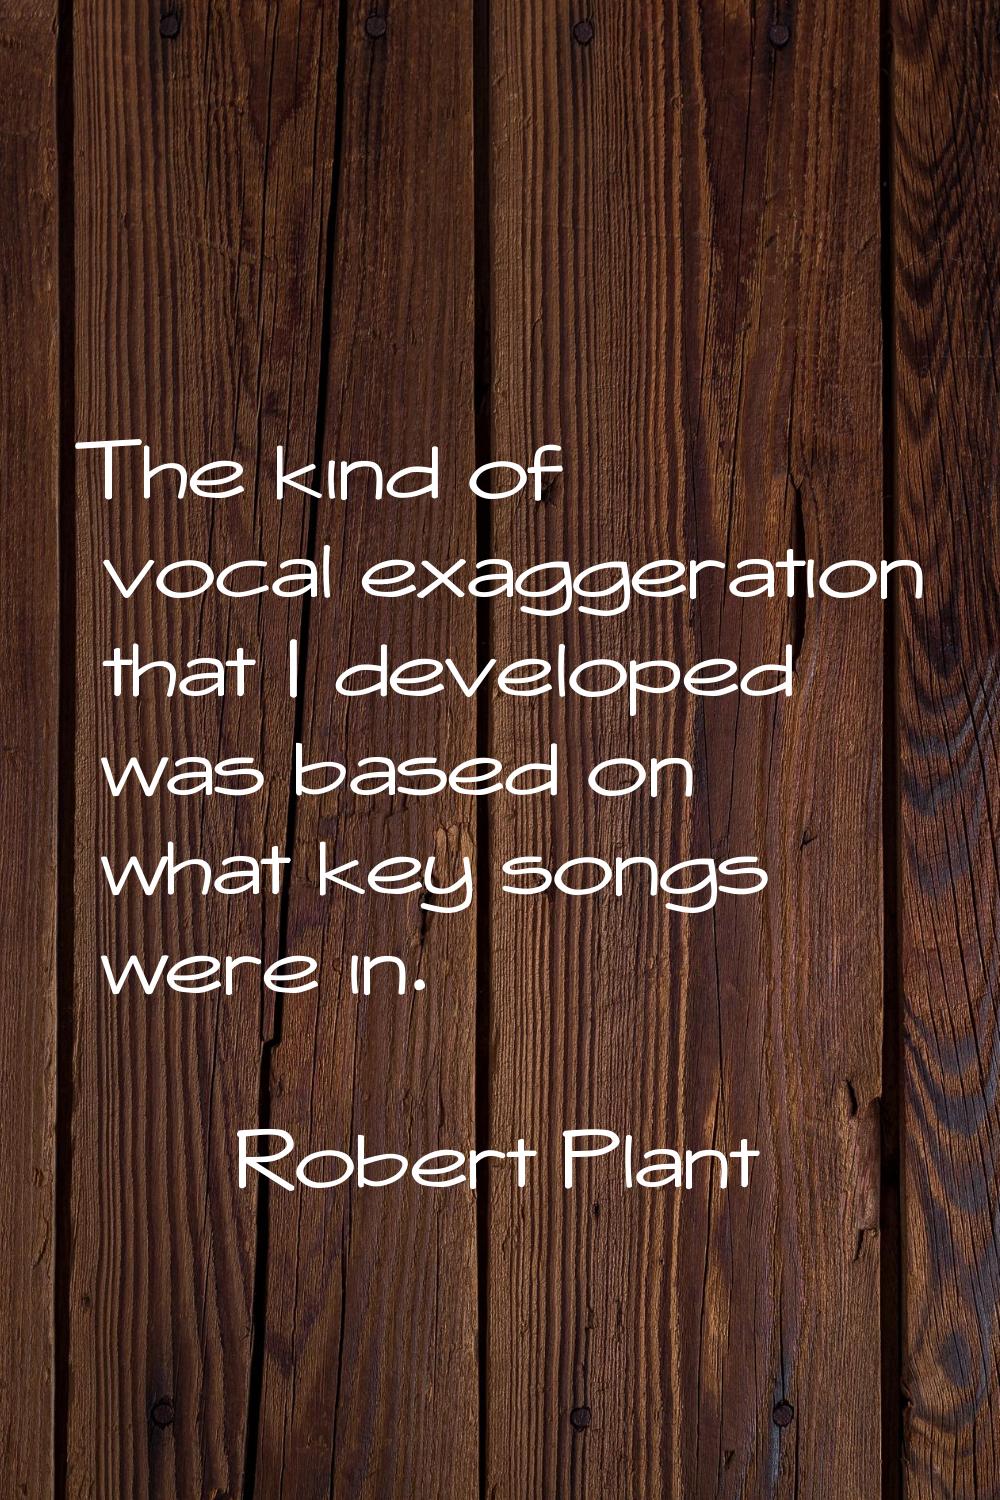 The kind of vocal exaggeration that I developed was based on what key songs were in.